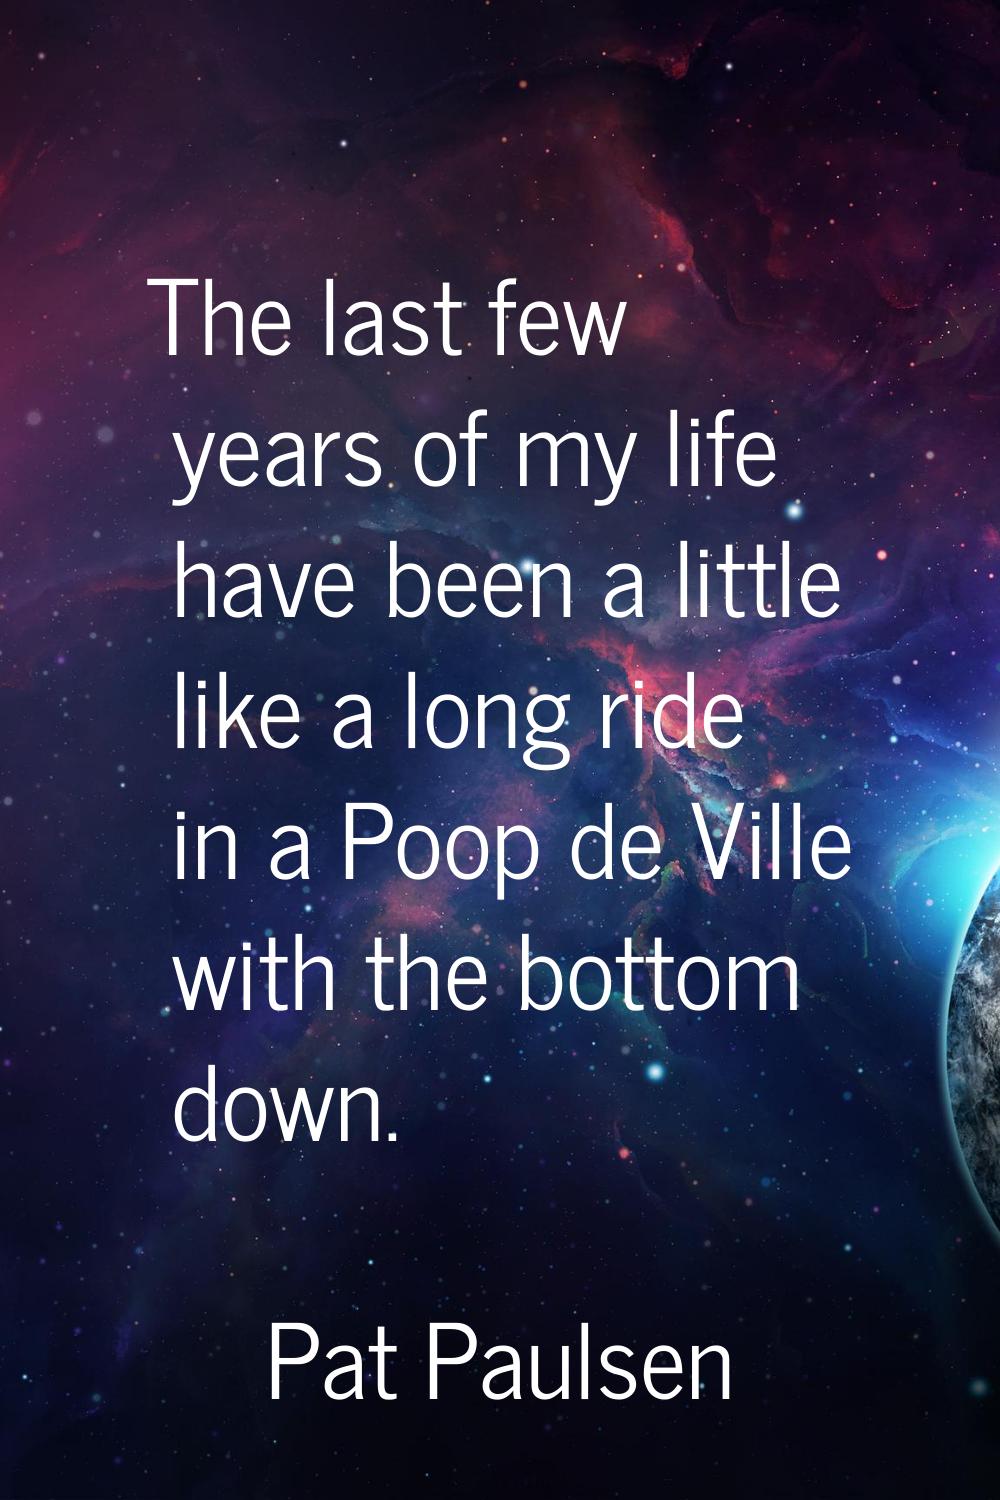 The last few years of my life have been a little like a long ride in a Poop de Ville with the botto